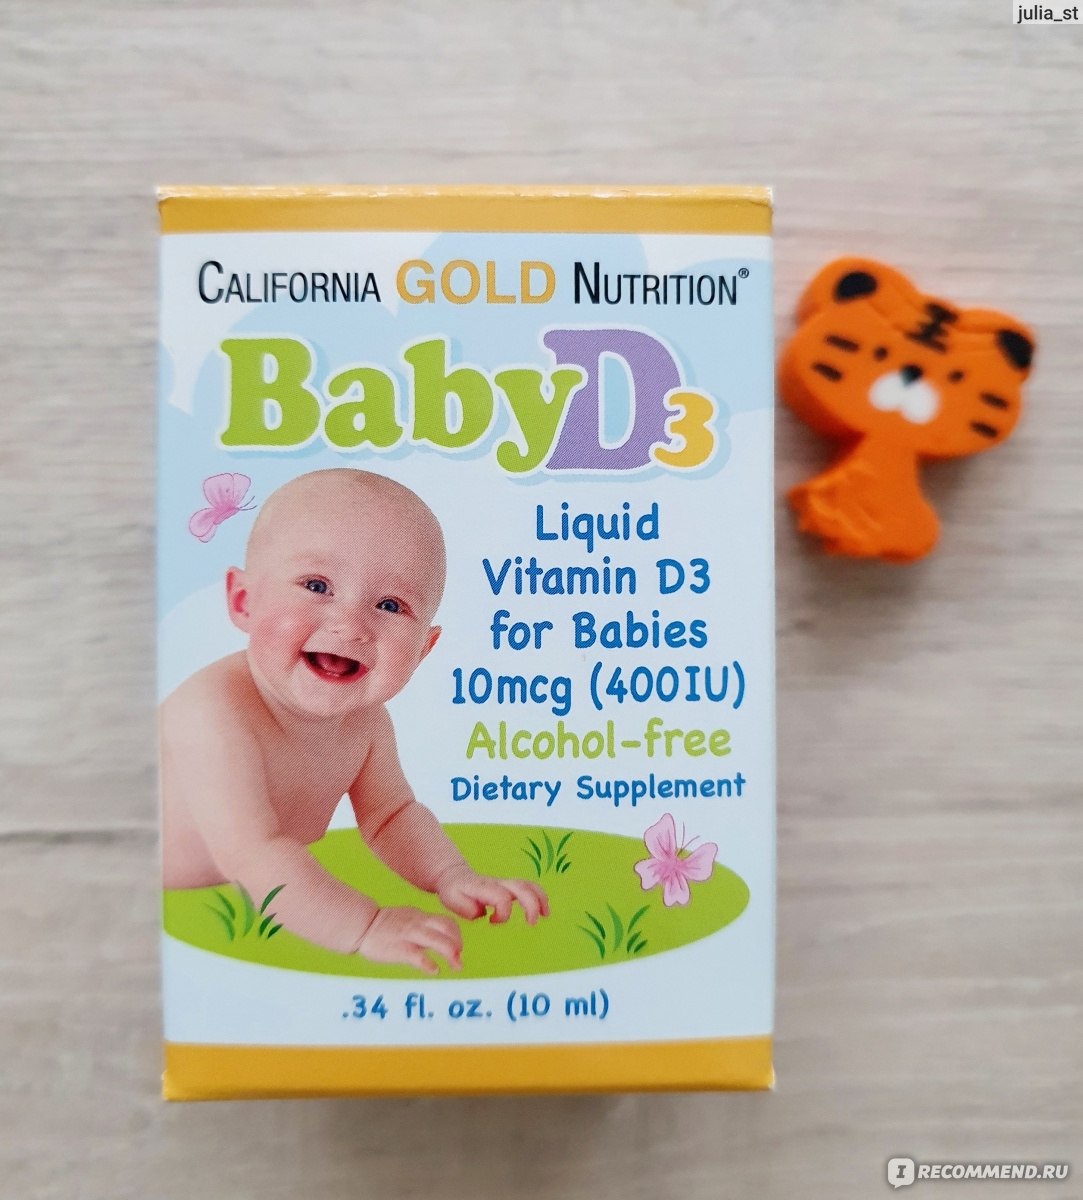 California gold nutrition d3 капли. Baby д3 California Gold Nutrition. Витамин д3 California Gold Nutrition Baby. Витамин д3 California Gold Nutrition детский. Д3 California Gold Nutrition детский.